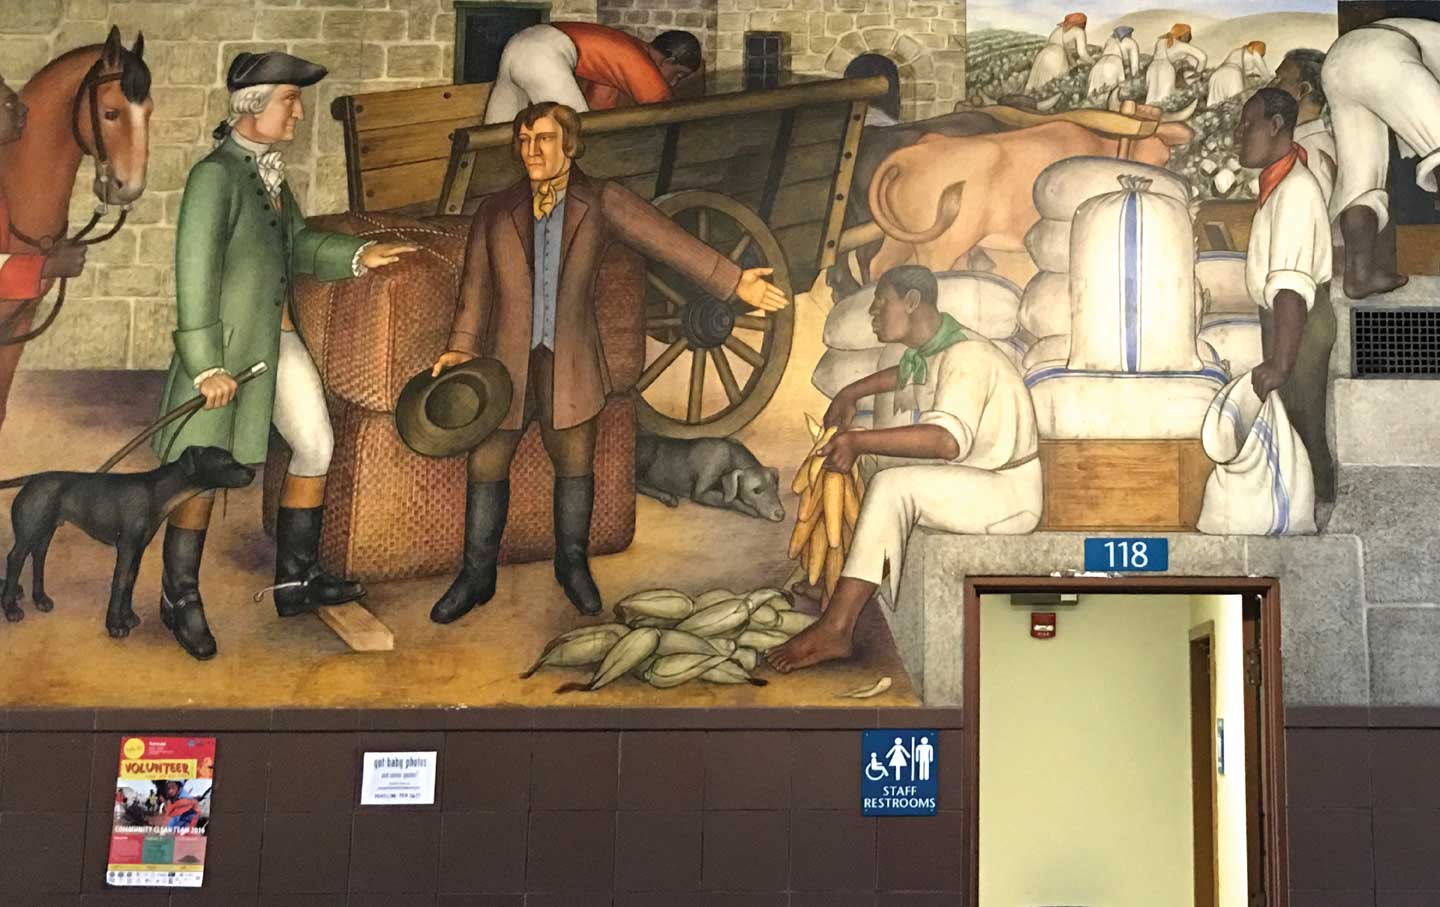 We’re Getting These Murals All Wrong